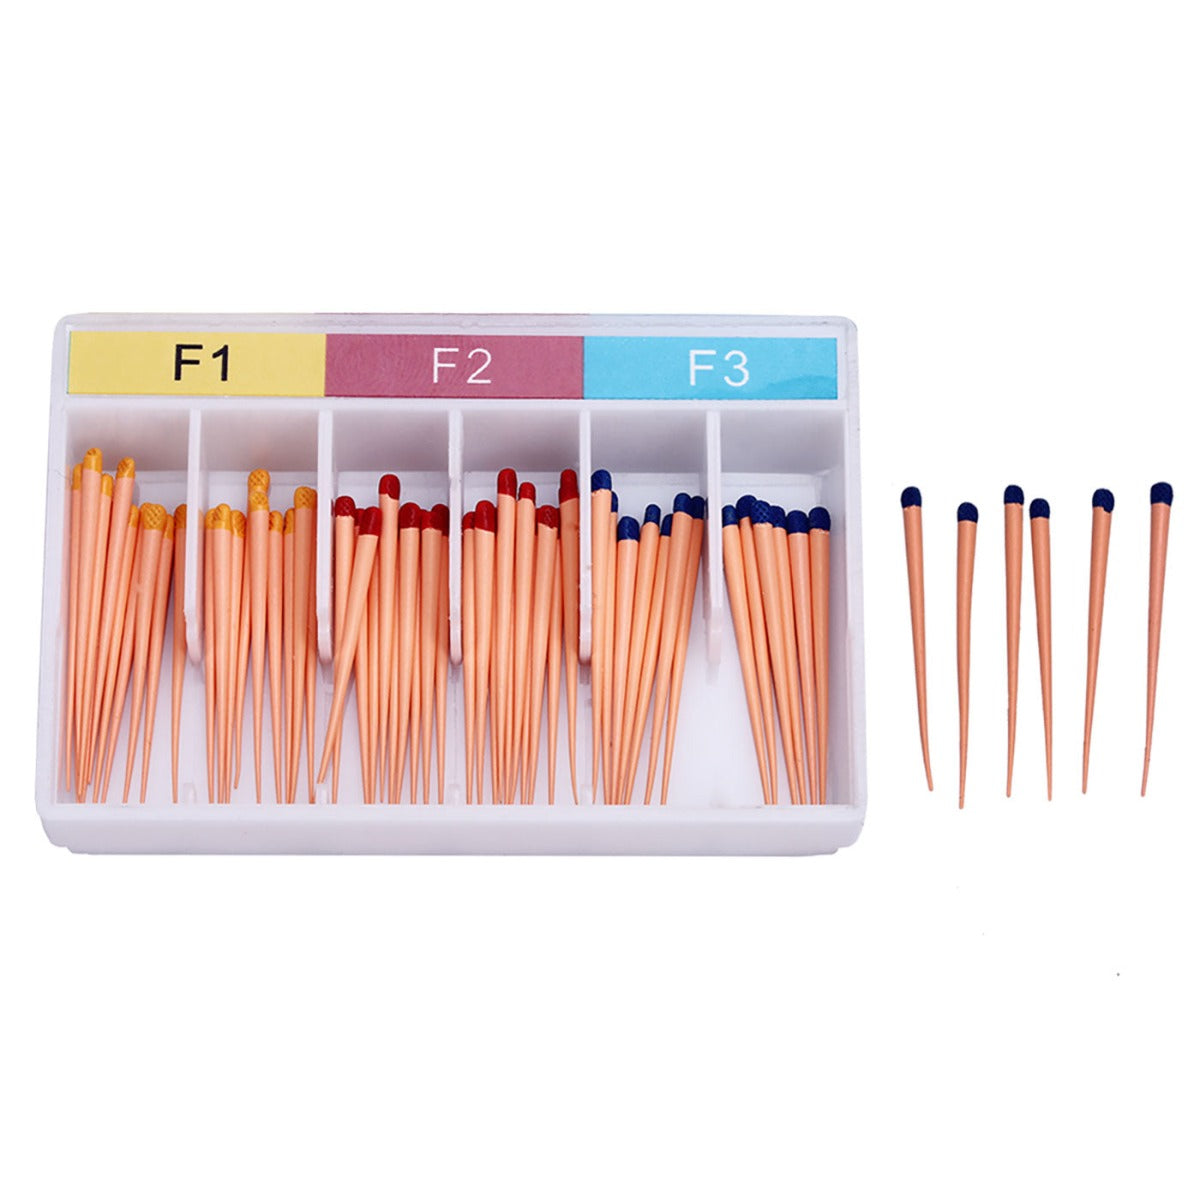 Gutta Percha Points Assorted F1 F2 F3 Color Coded 60pcs/Pack - pairaydental.com